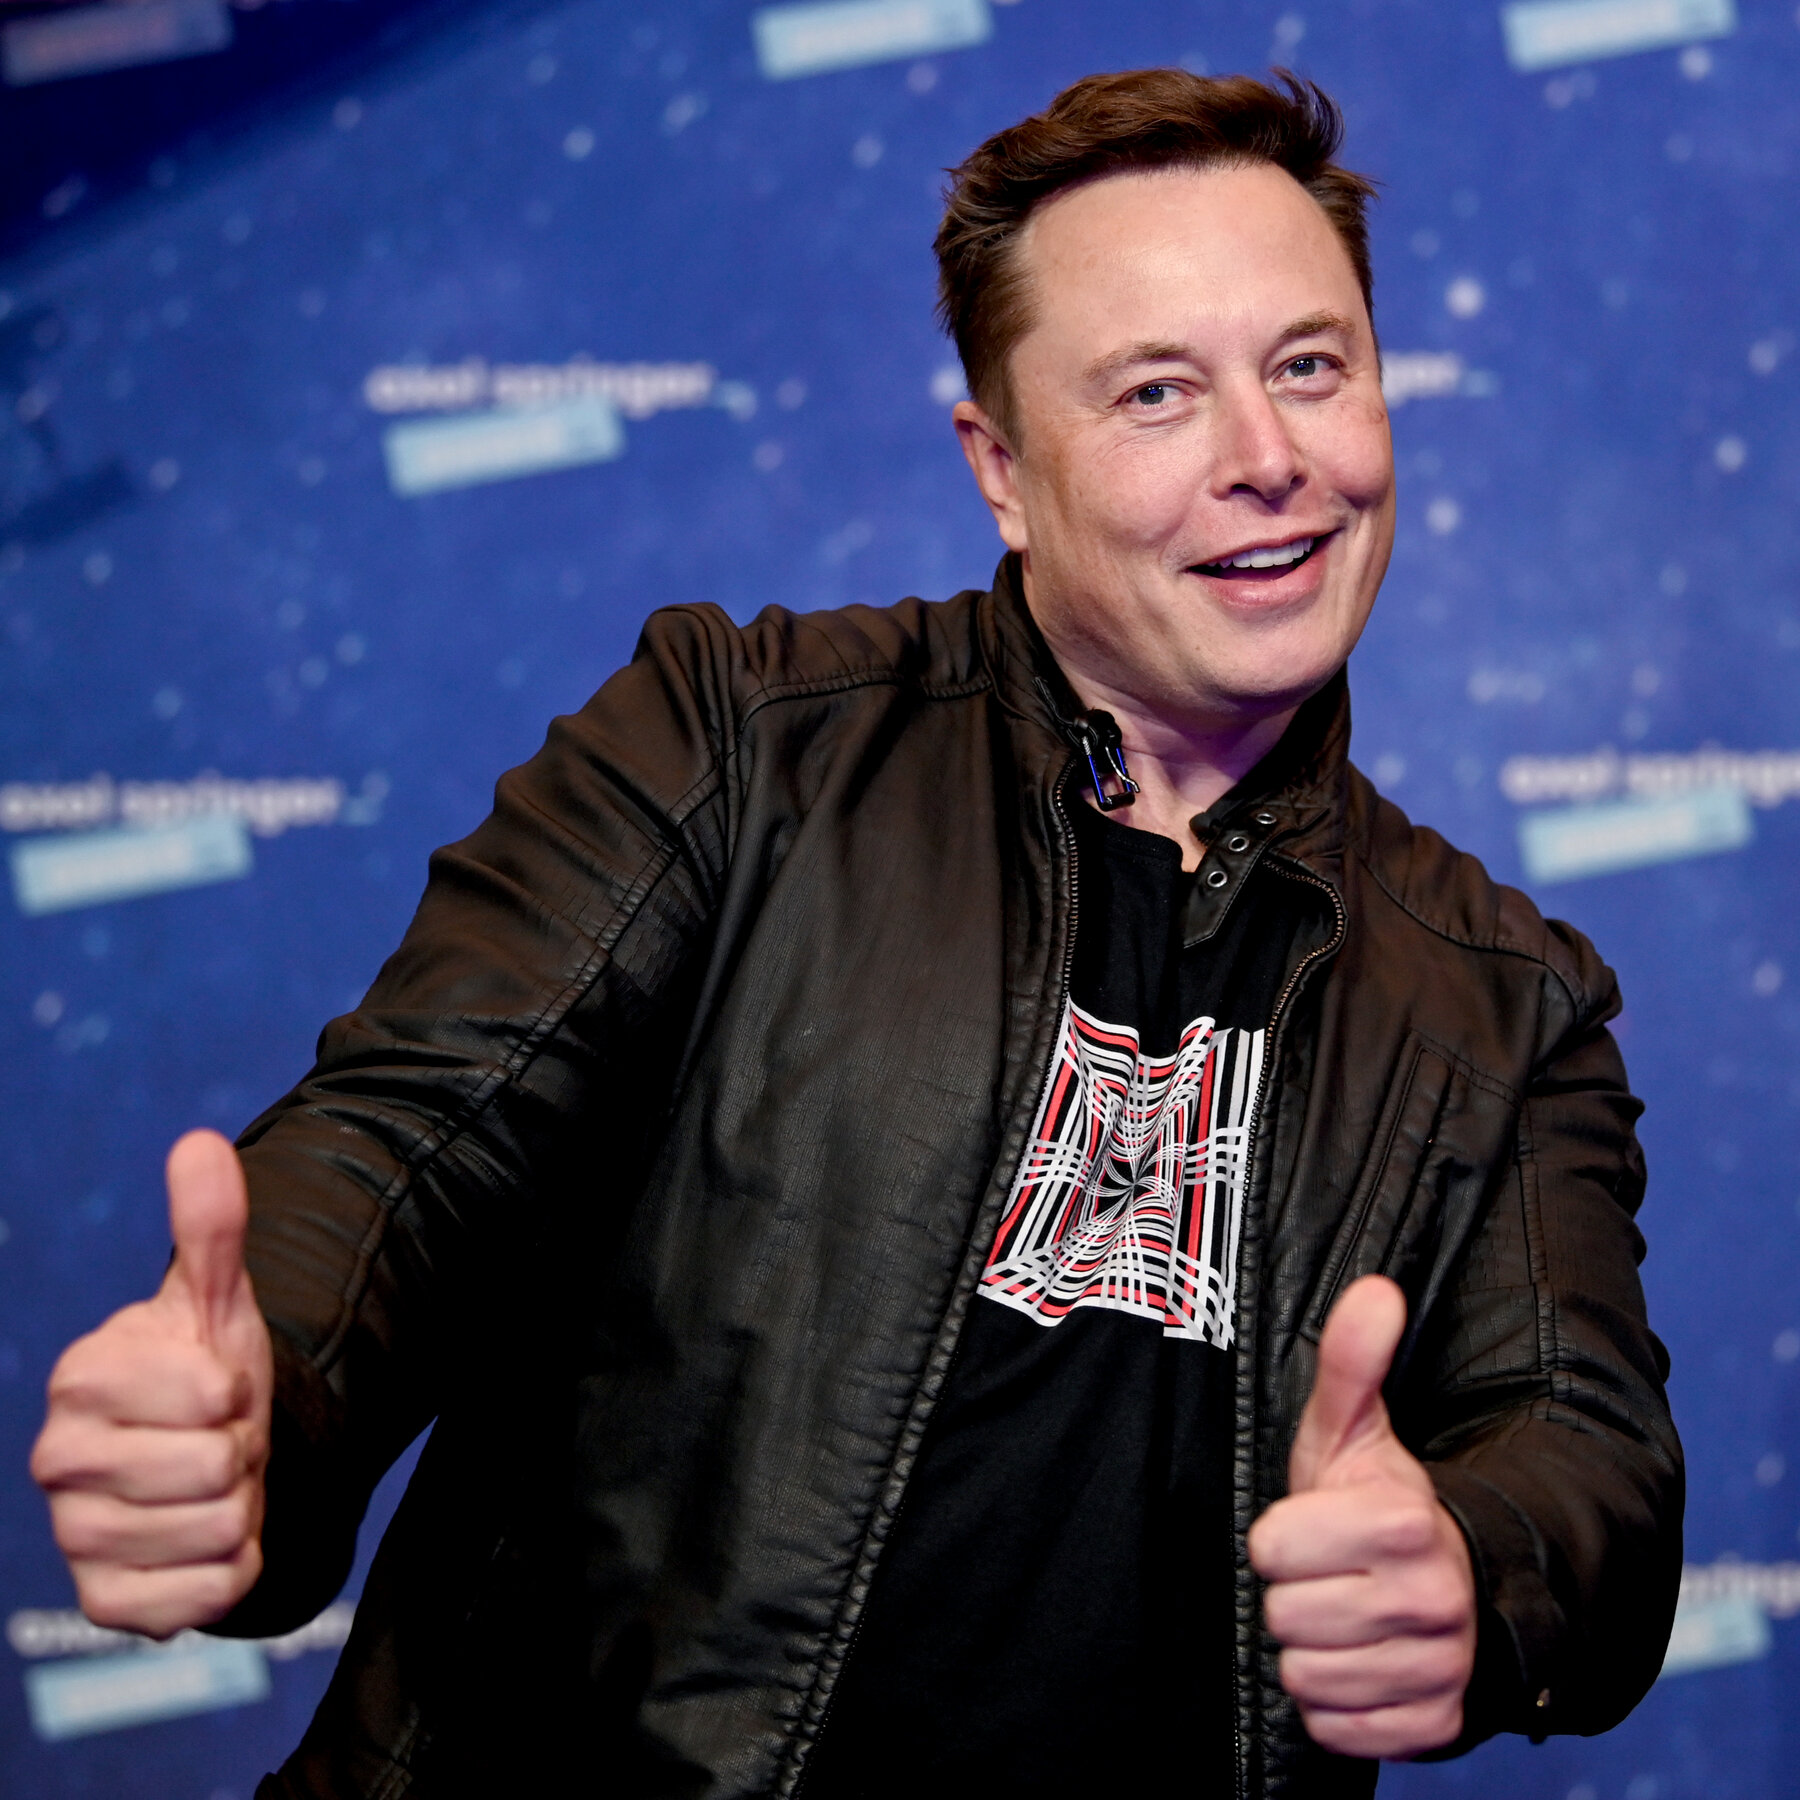 Elon Musk is in the mood for big changes in Twitter